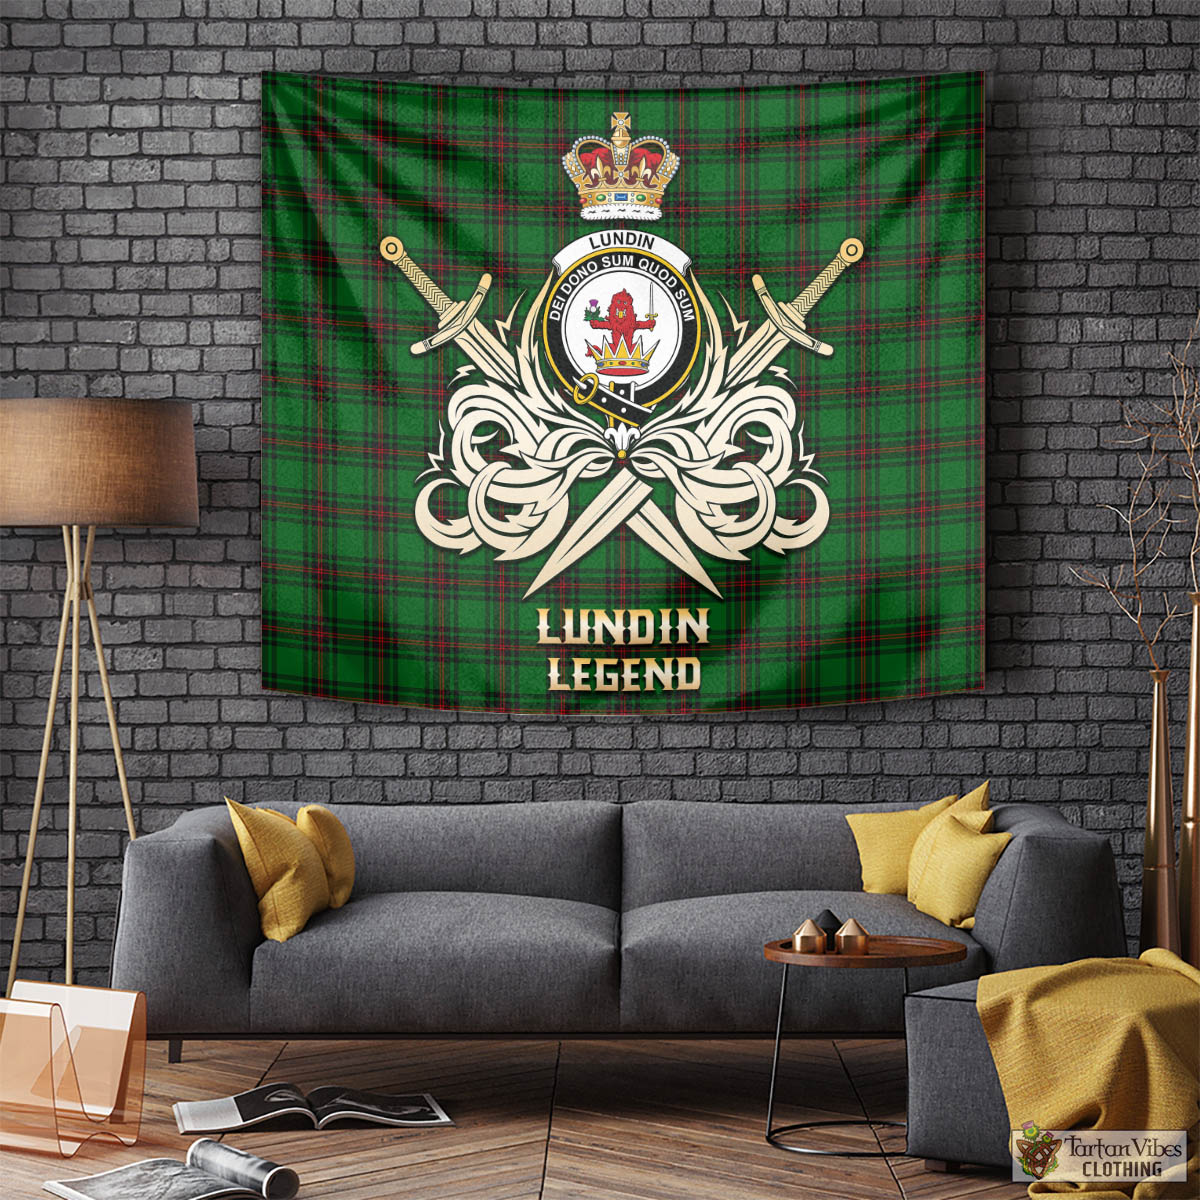 Tartan Vibes Clothing Lundin Tartan Tapestry with Clan Crest and the Golden Sword of Courageous Legacy